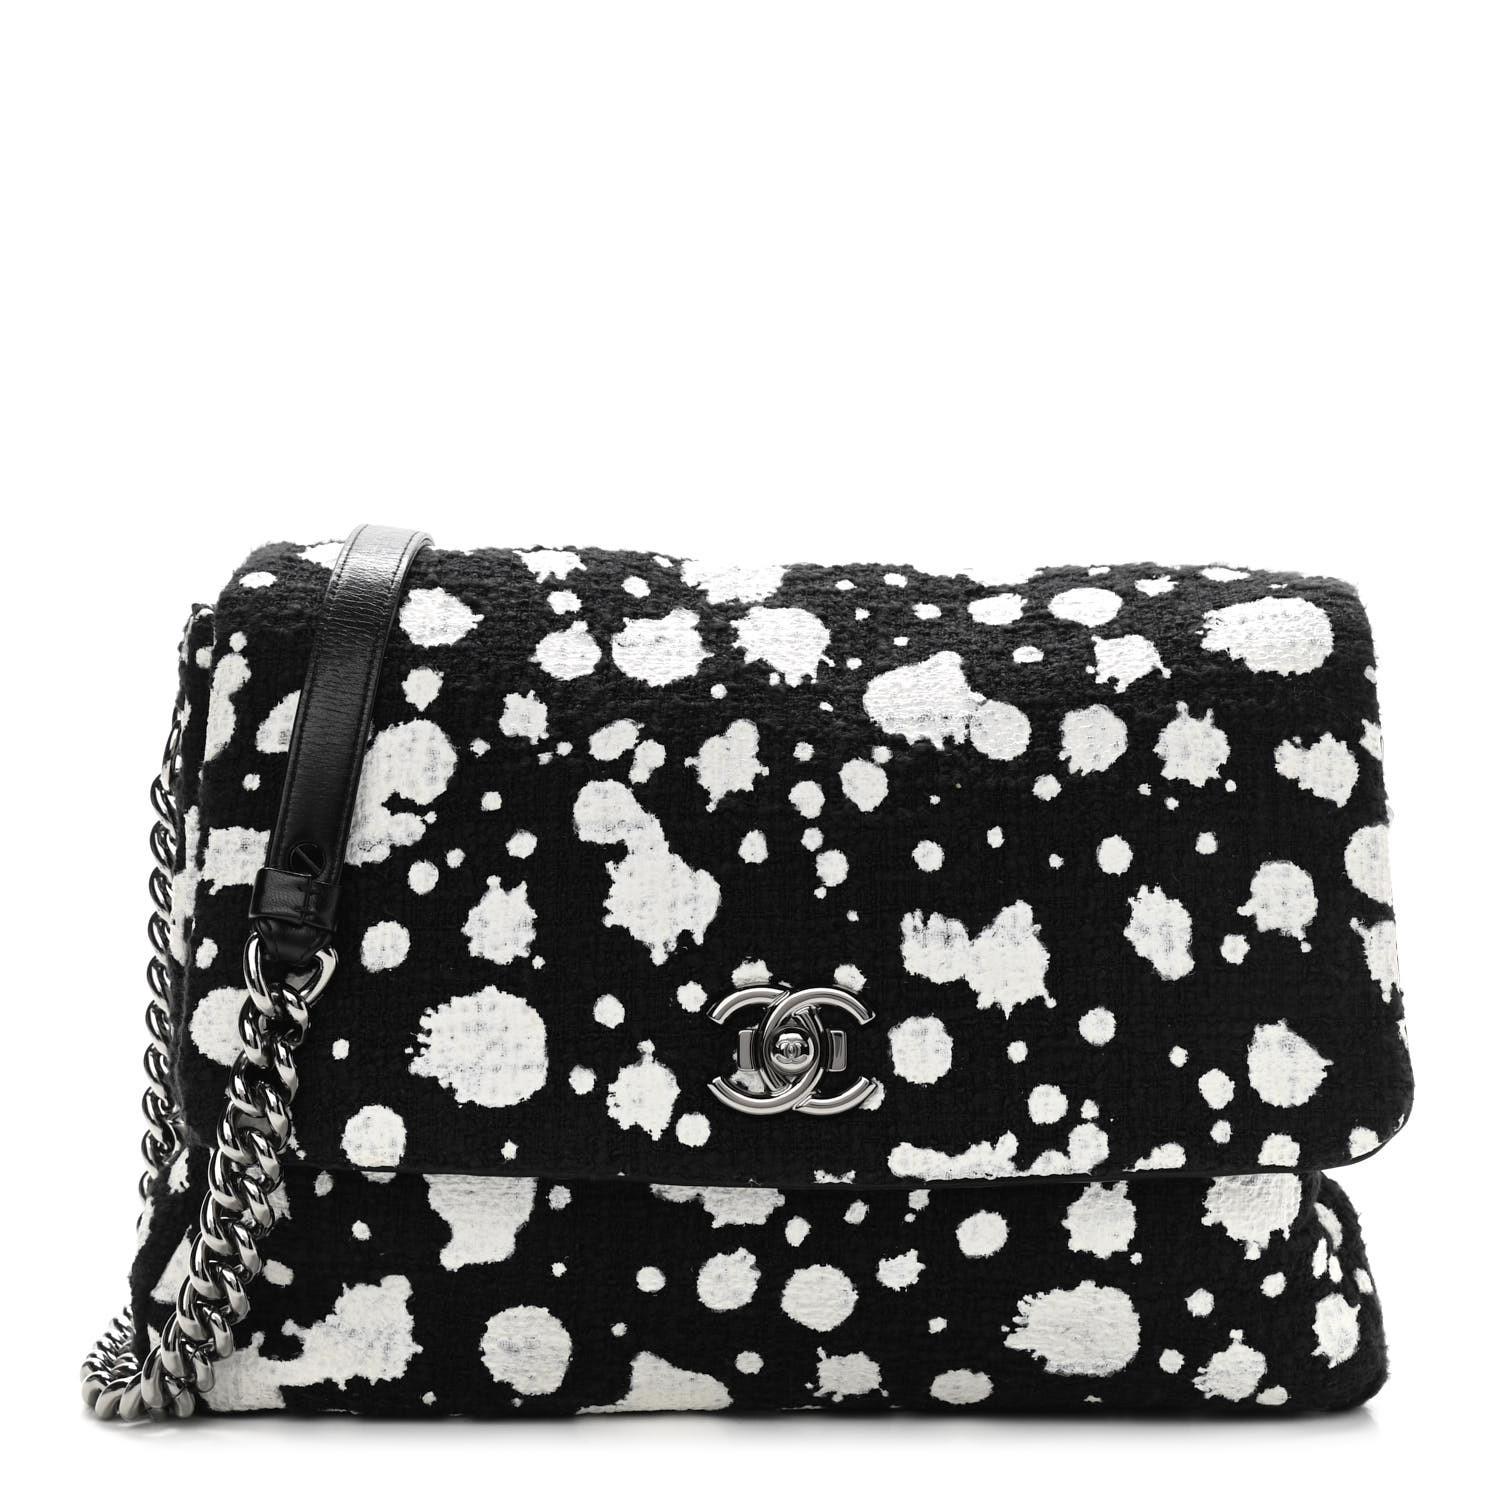 Chanel Classic Flap Rare White Limited Edition Paint Black Tweed Shoulder Bag For Sale 4